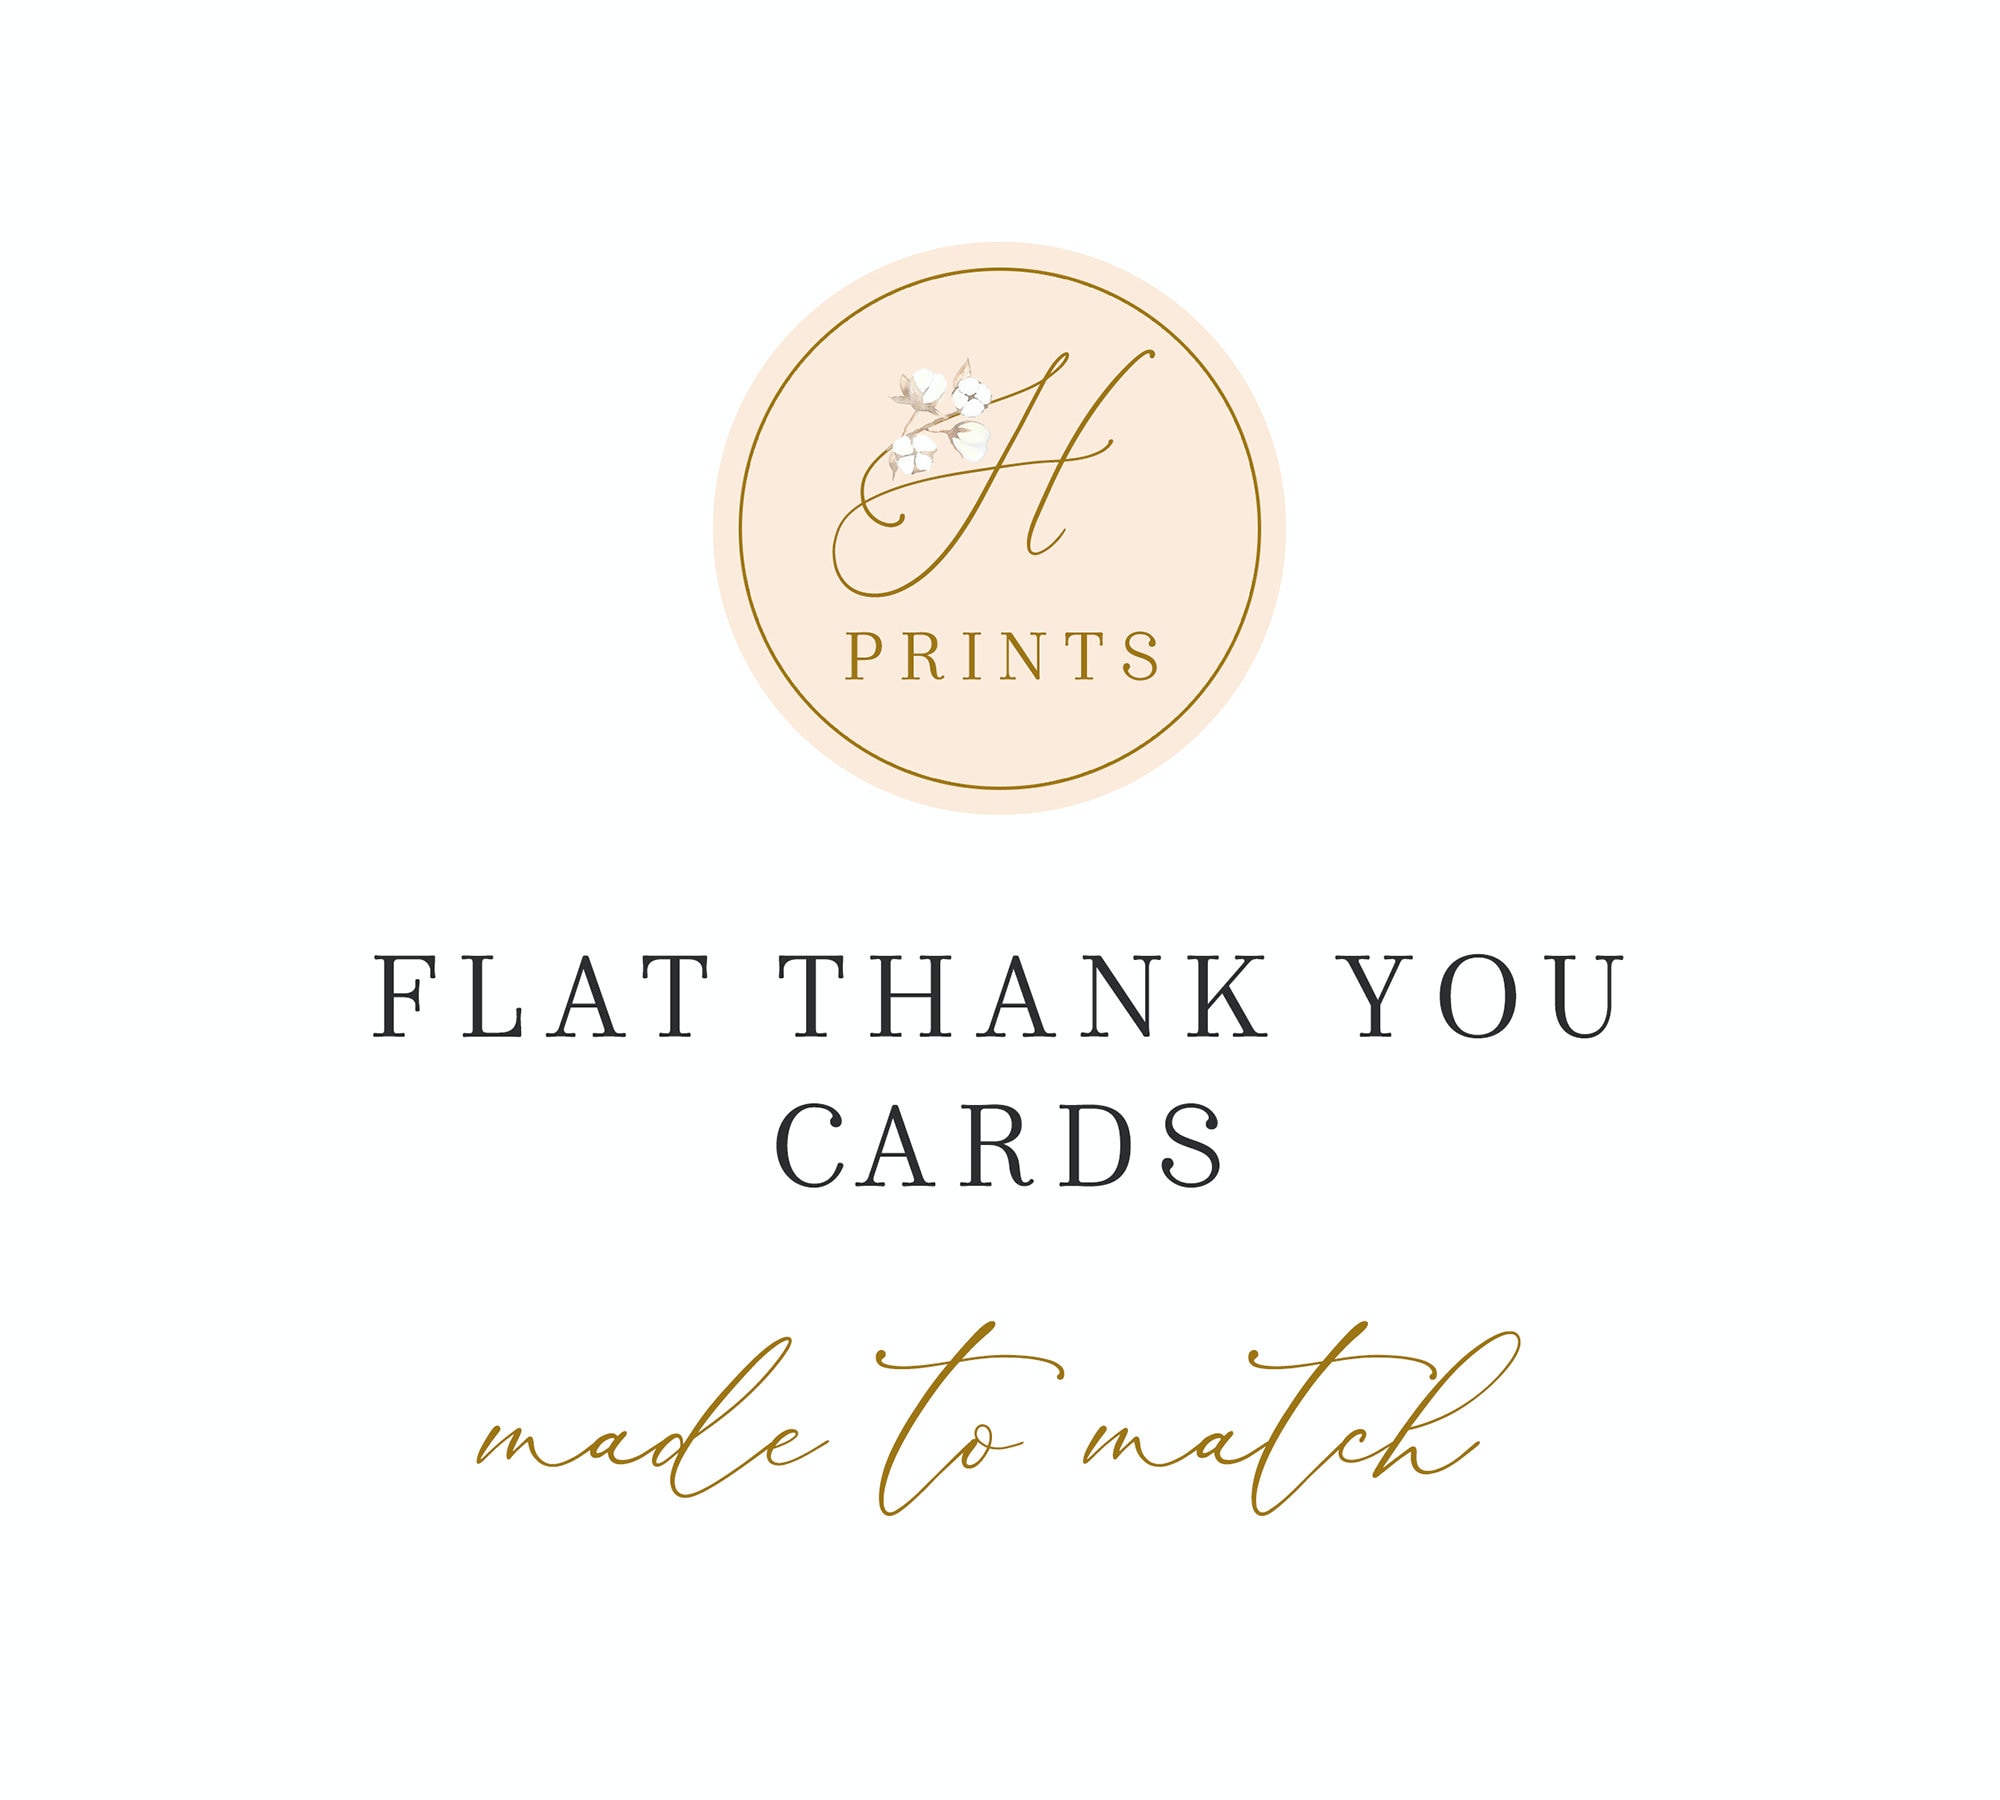 Flat thank you cards